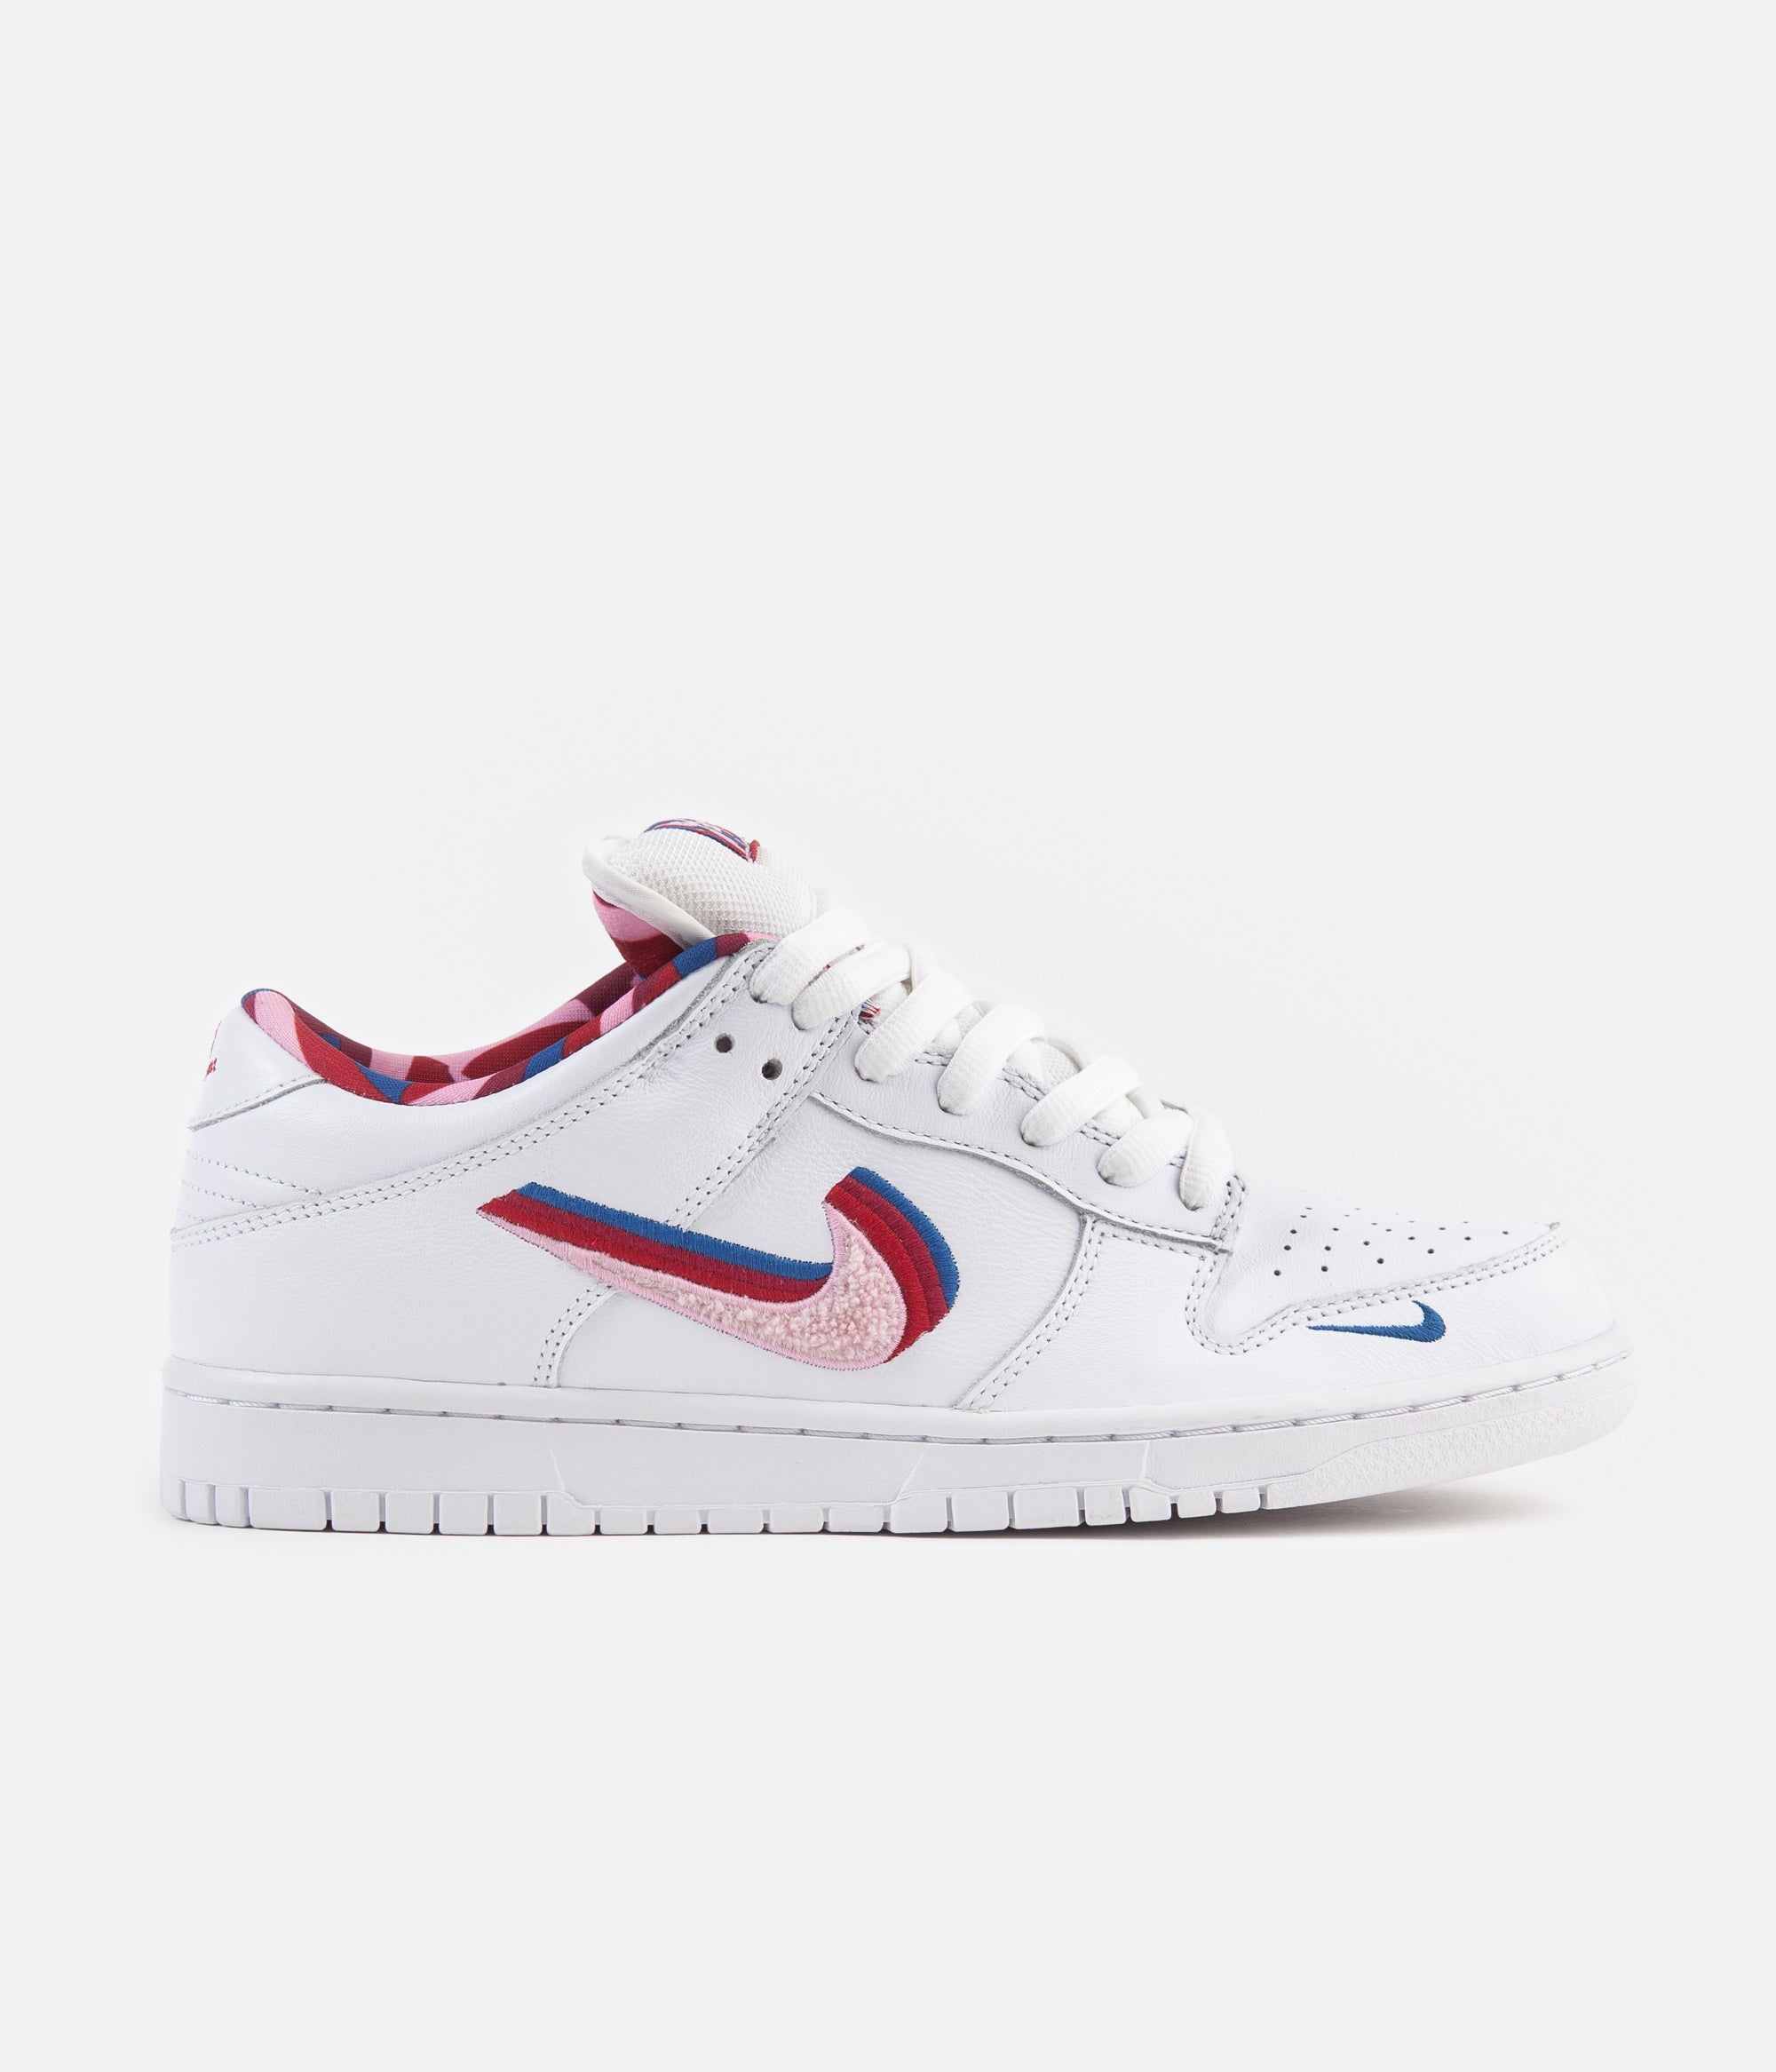 nike red white blue sneakers